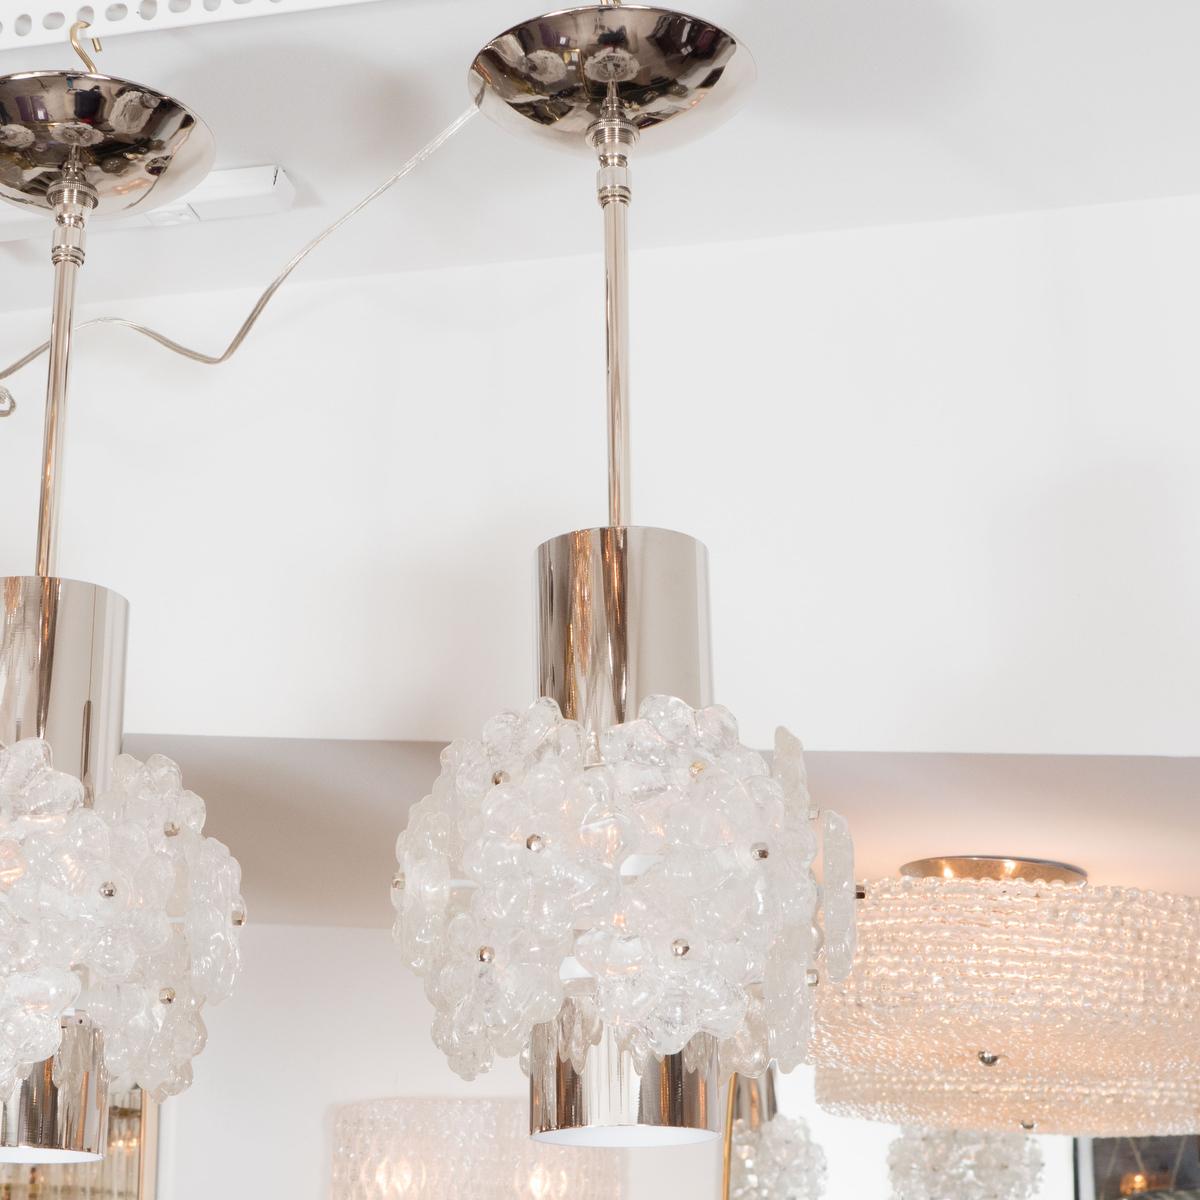 Cylindrical nickel pendant fixture featuring Lucite flower clusters.